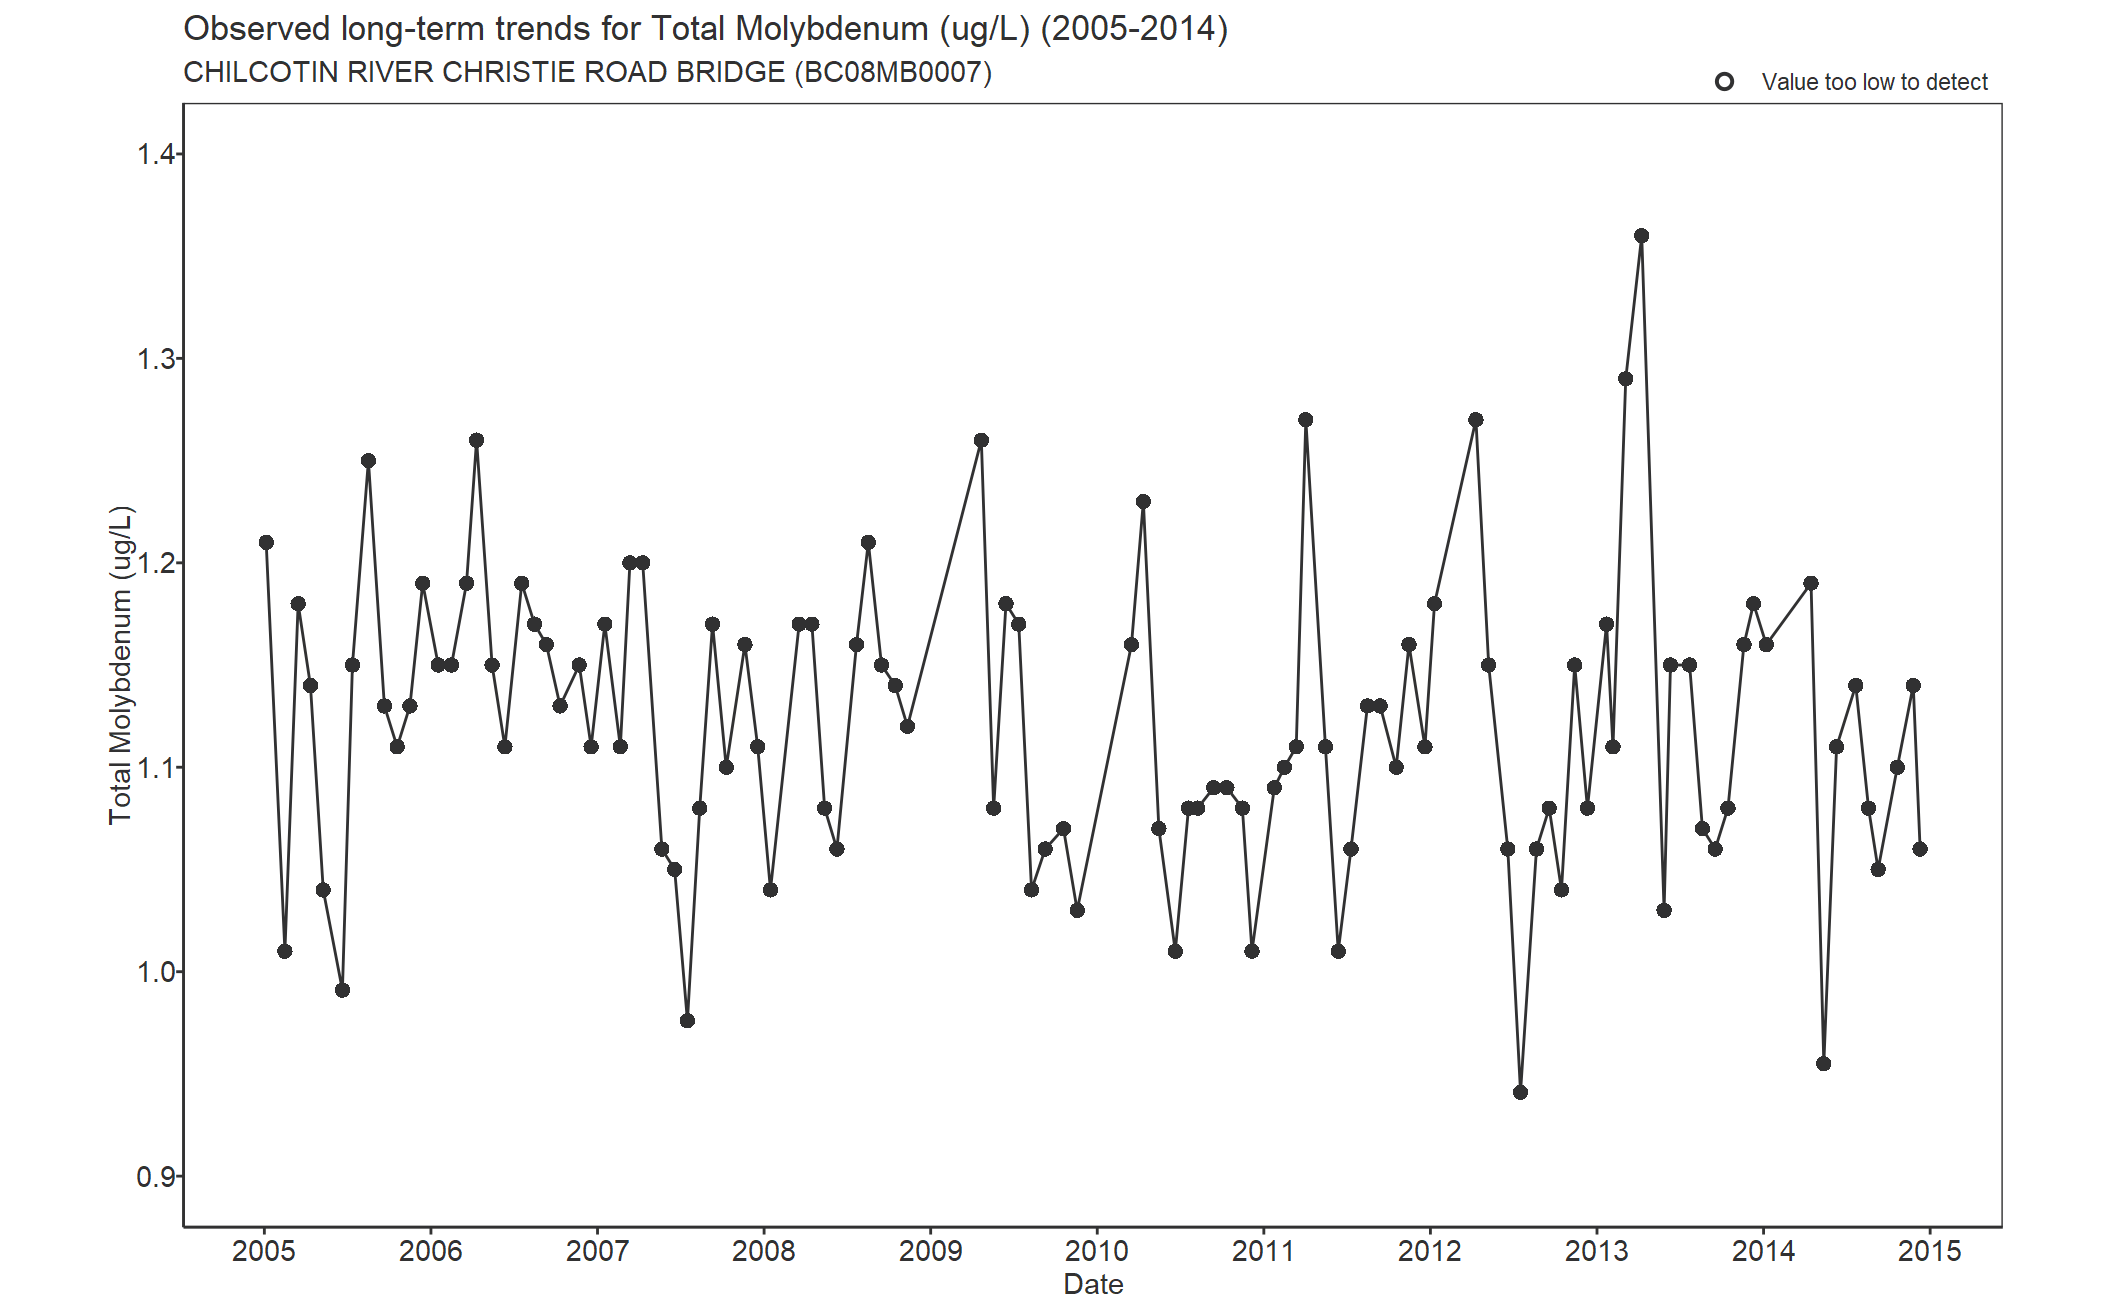 Observed long-term trends for Molybdenum Total (2005-2014)